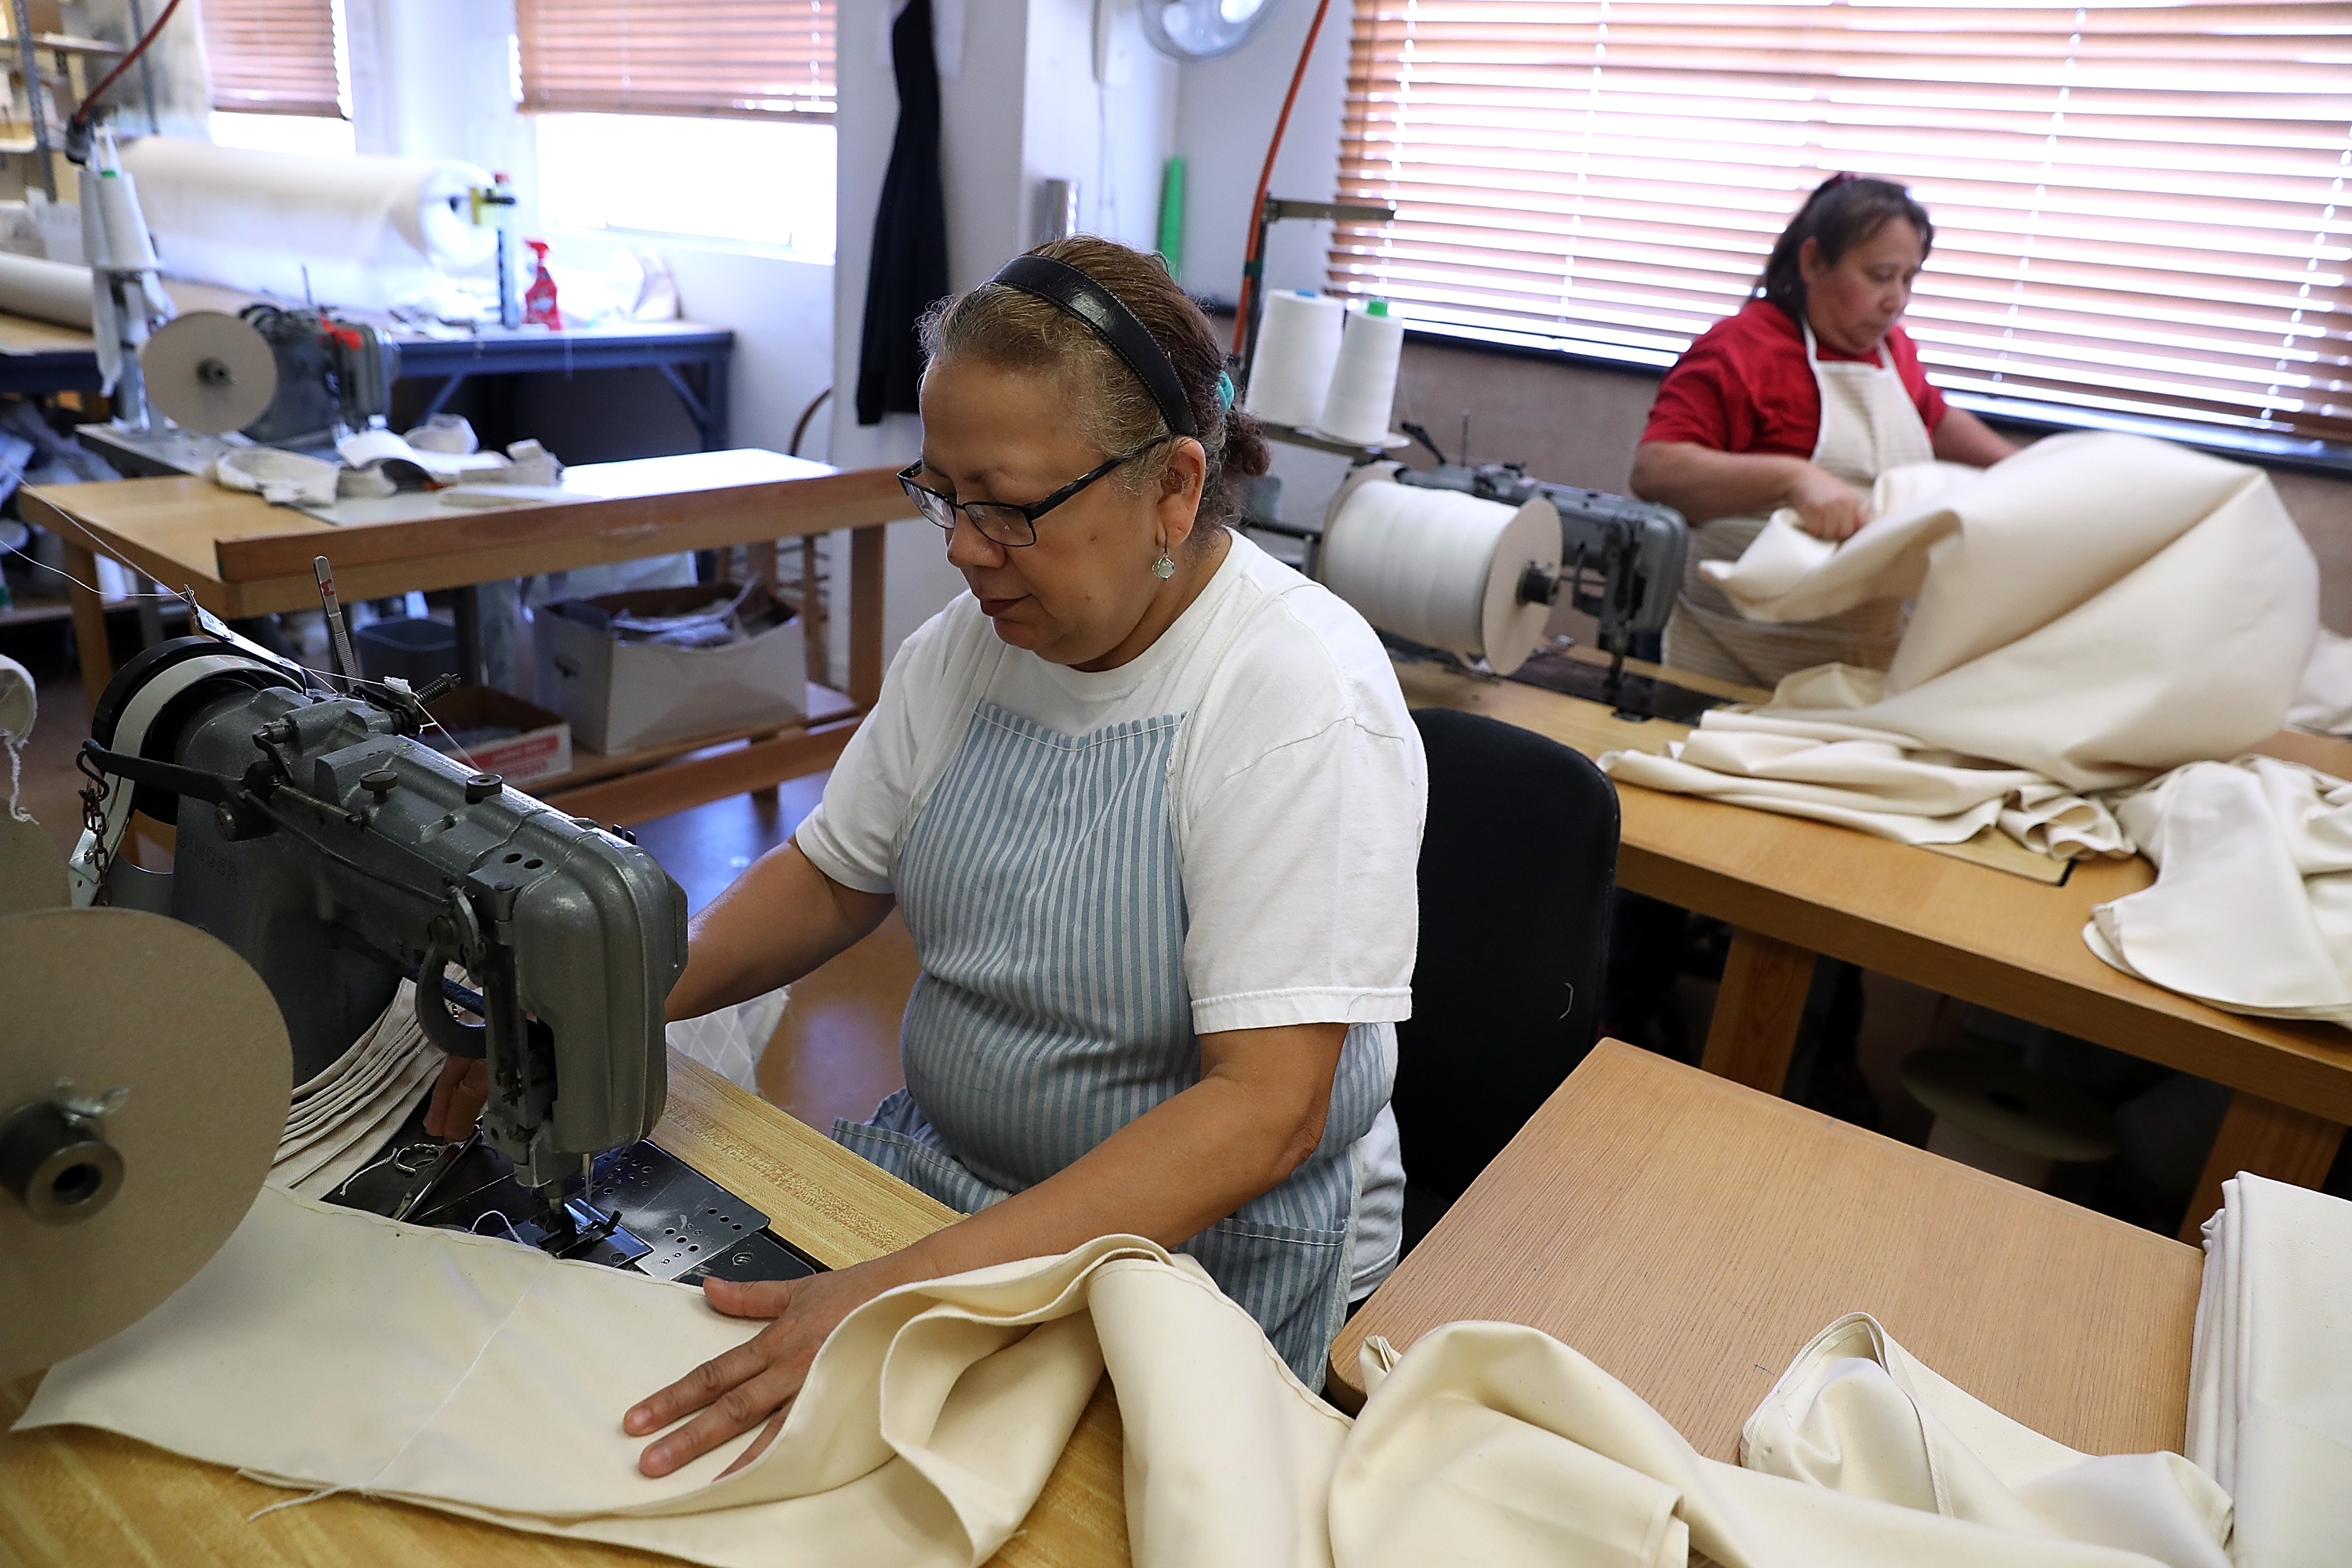 SAN FRANCISCO, CA - AUGUST 09: Workers operate sewing machines at McRoskey Mattress Company on August 9, 2016 in San Francisco, California. According to a report by the U.S. Labor Department, nonfarm business productivity dropped for the third consecutive quarter at an annual rate of 0.5% in the second quarter. (Photo by Justin Sullivan/Getty Images)